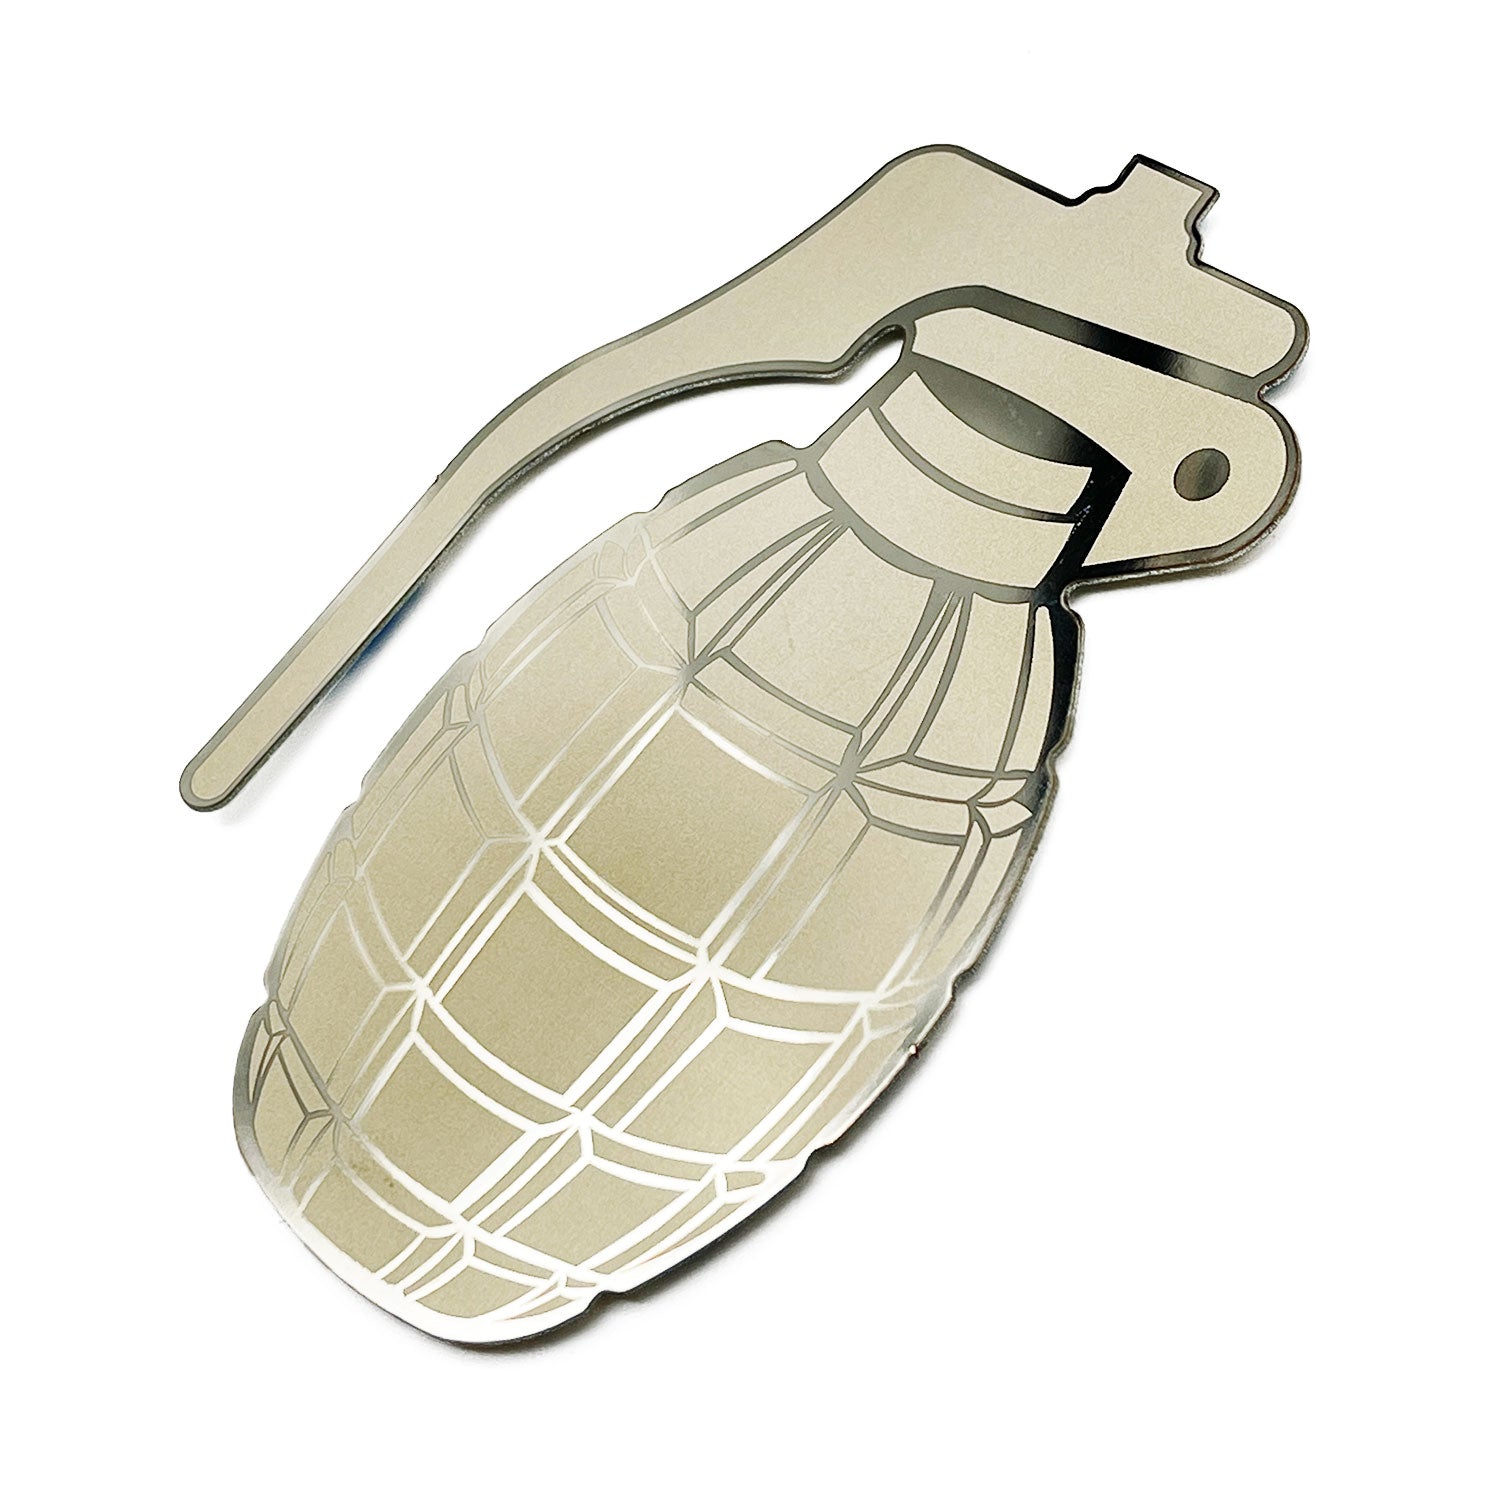 Grenade Emblem Badge Decal Sticker 3D Polished Stainless Steel Dual Layer